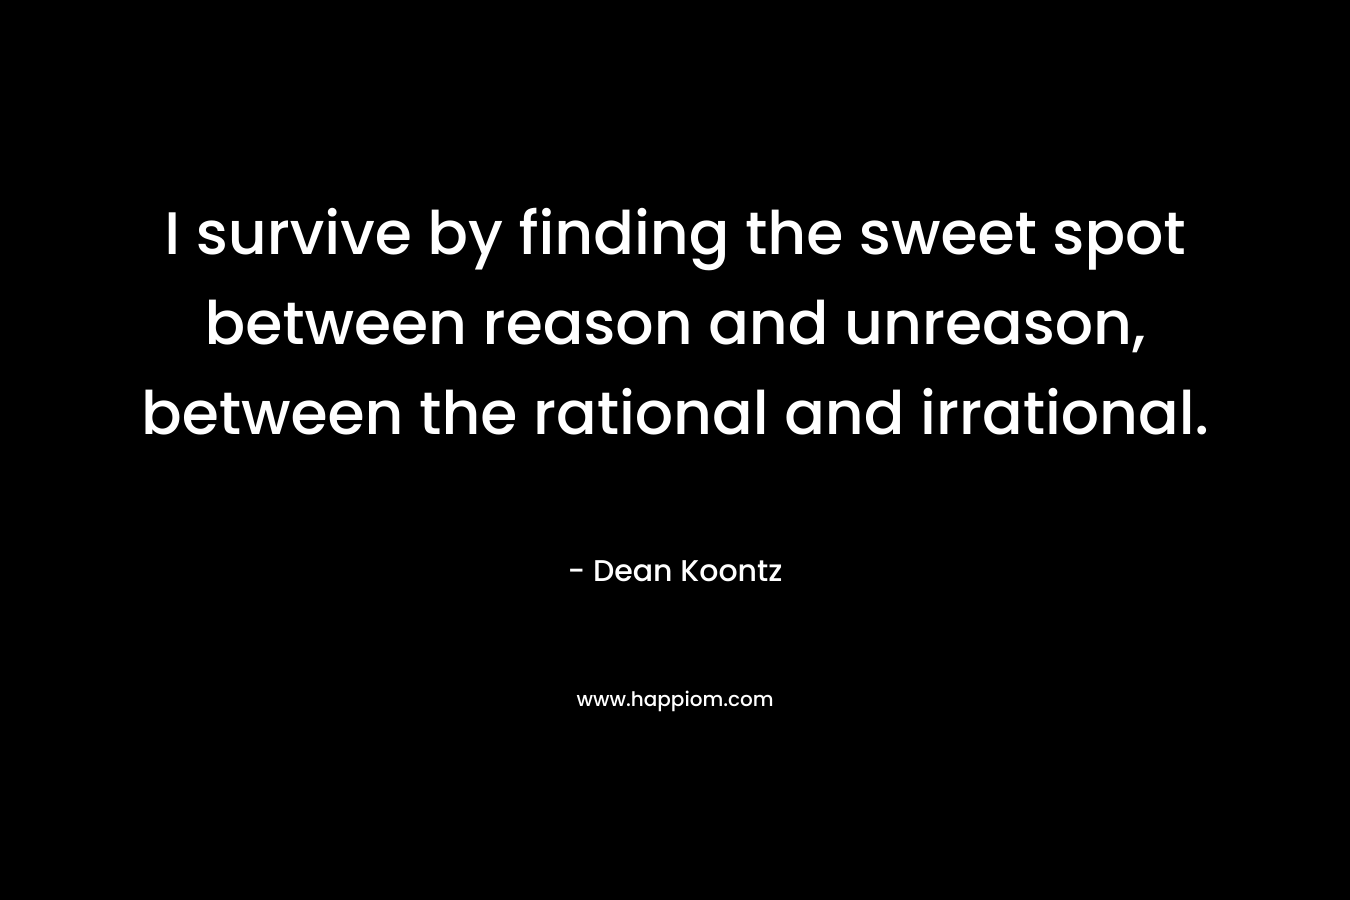 I survive by finding the sweet spot between reason and unreason, between the rational and irrational.